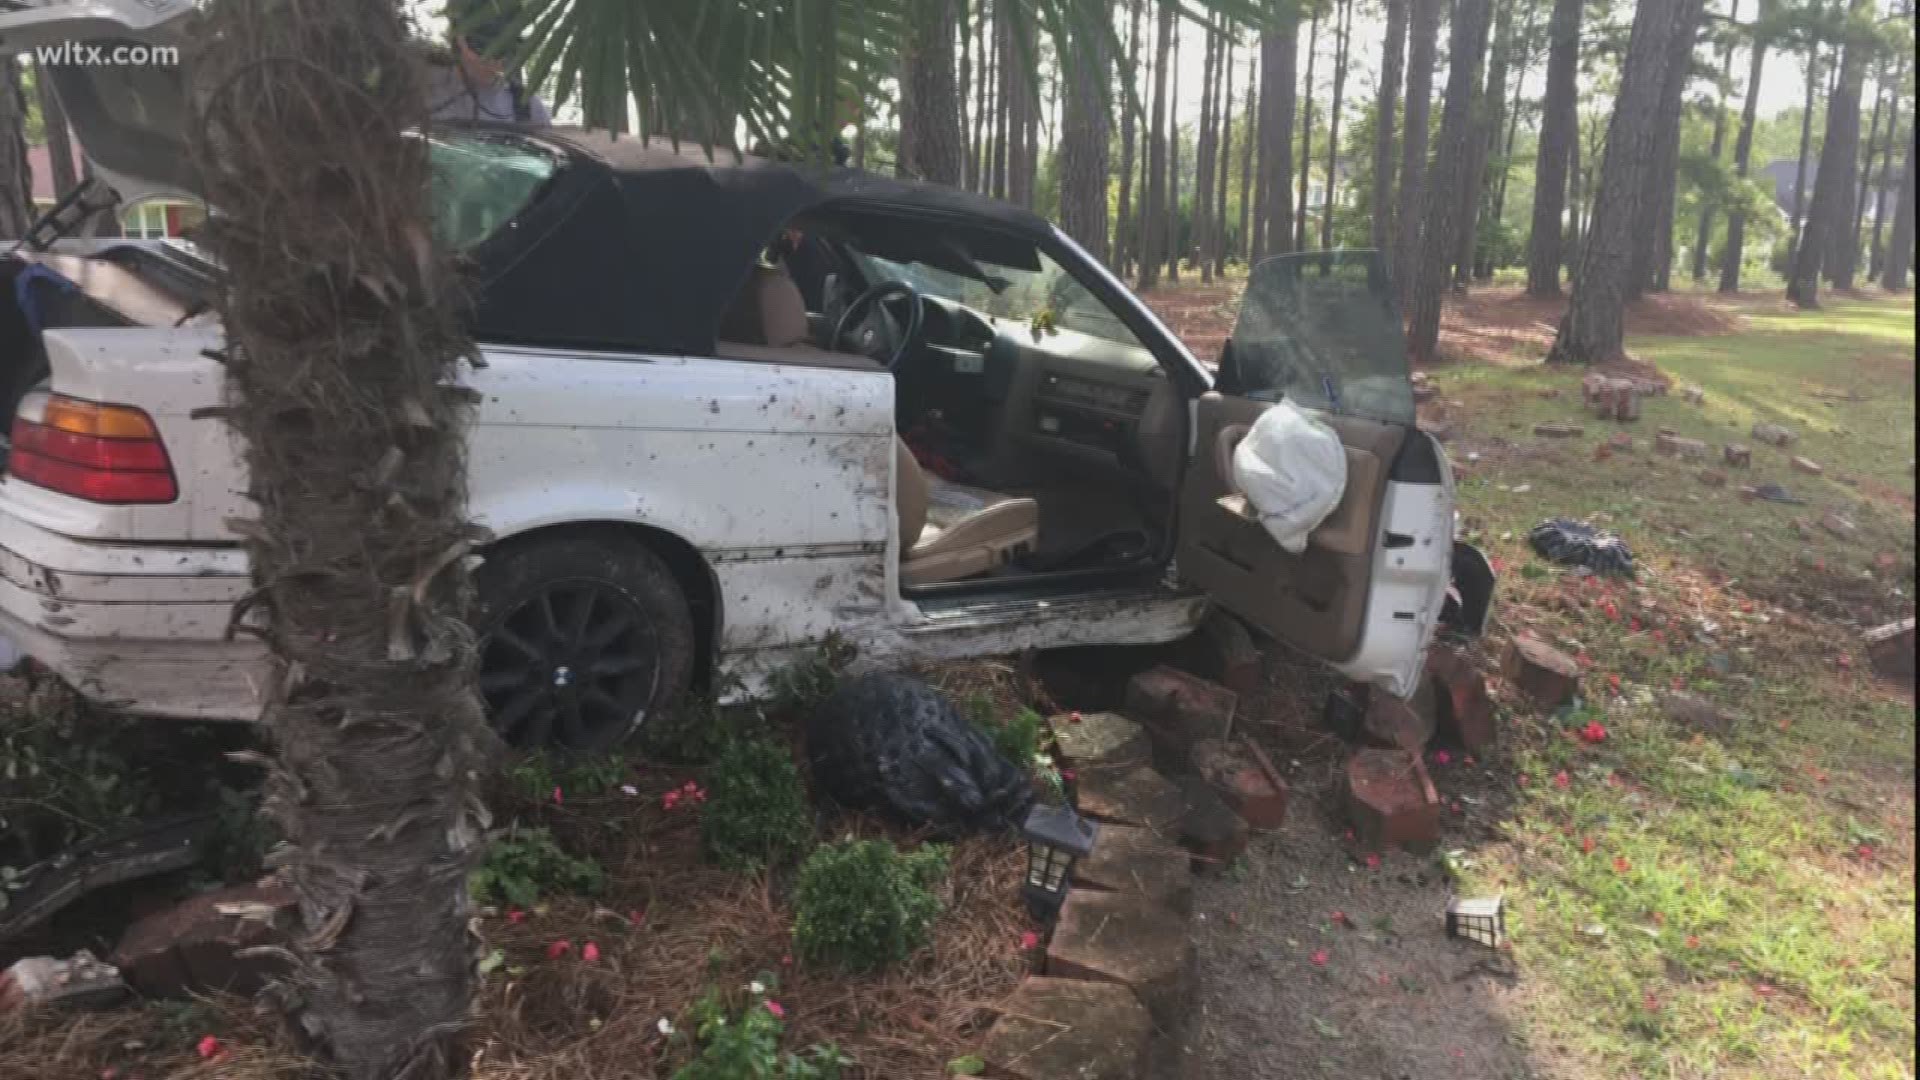 Kershaw county man is behind bars after leading police on a car chase that ended when he crashed in a woman's front yard